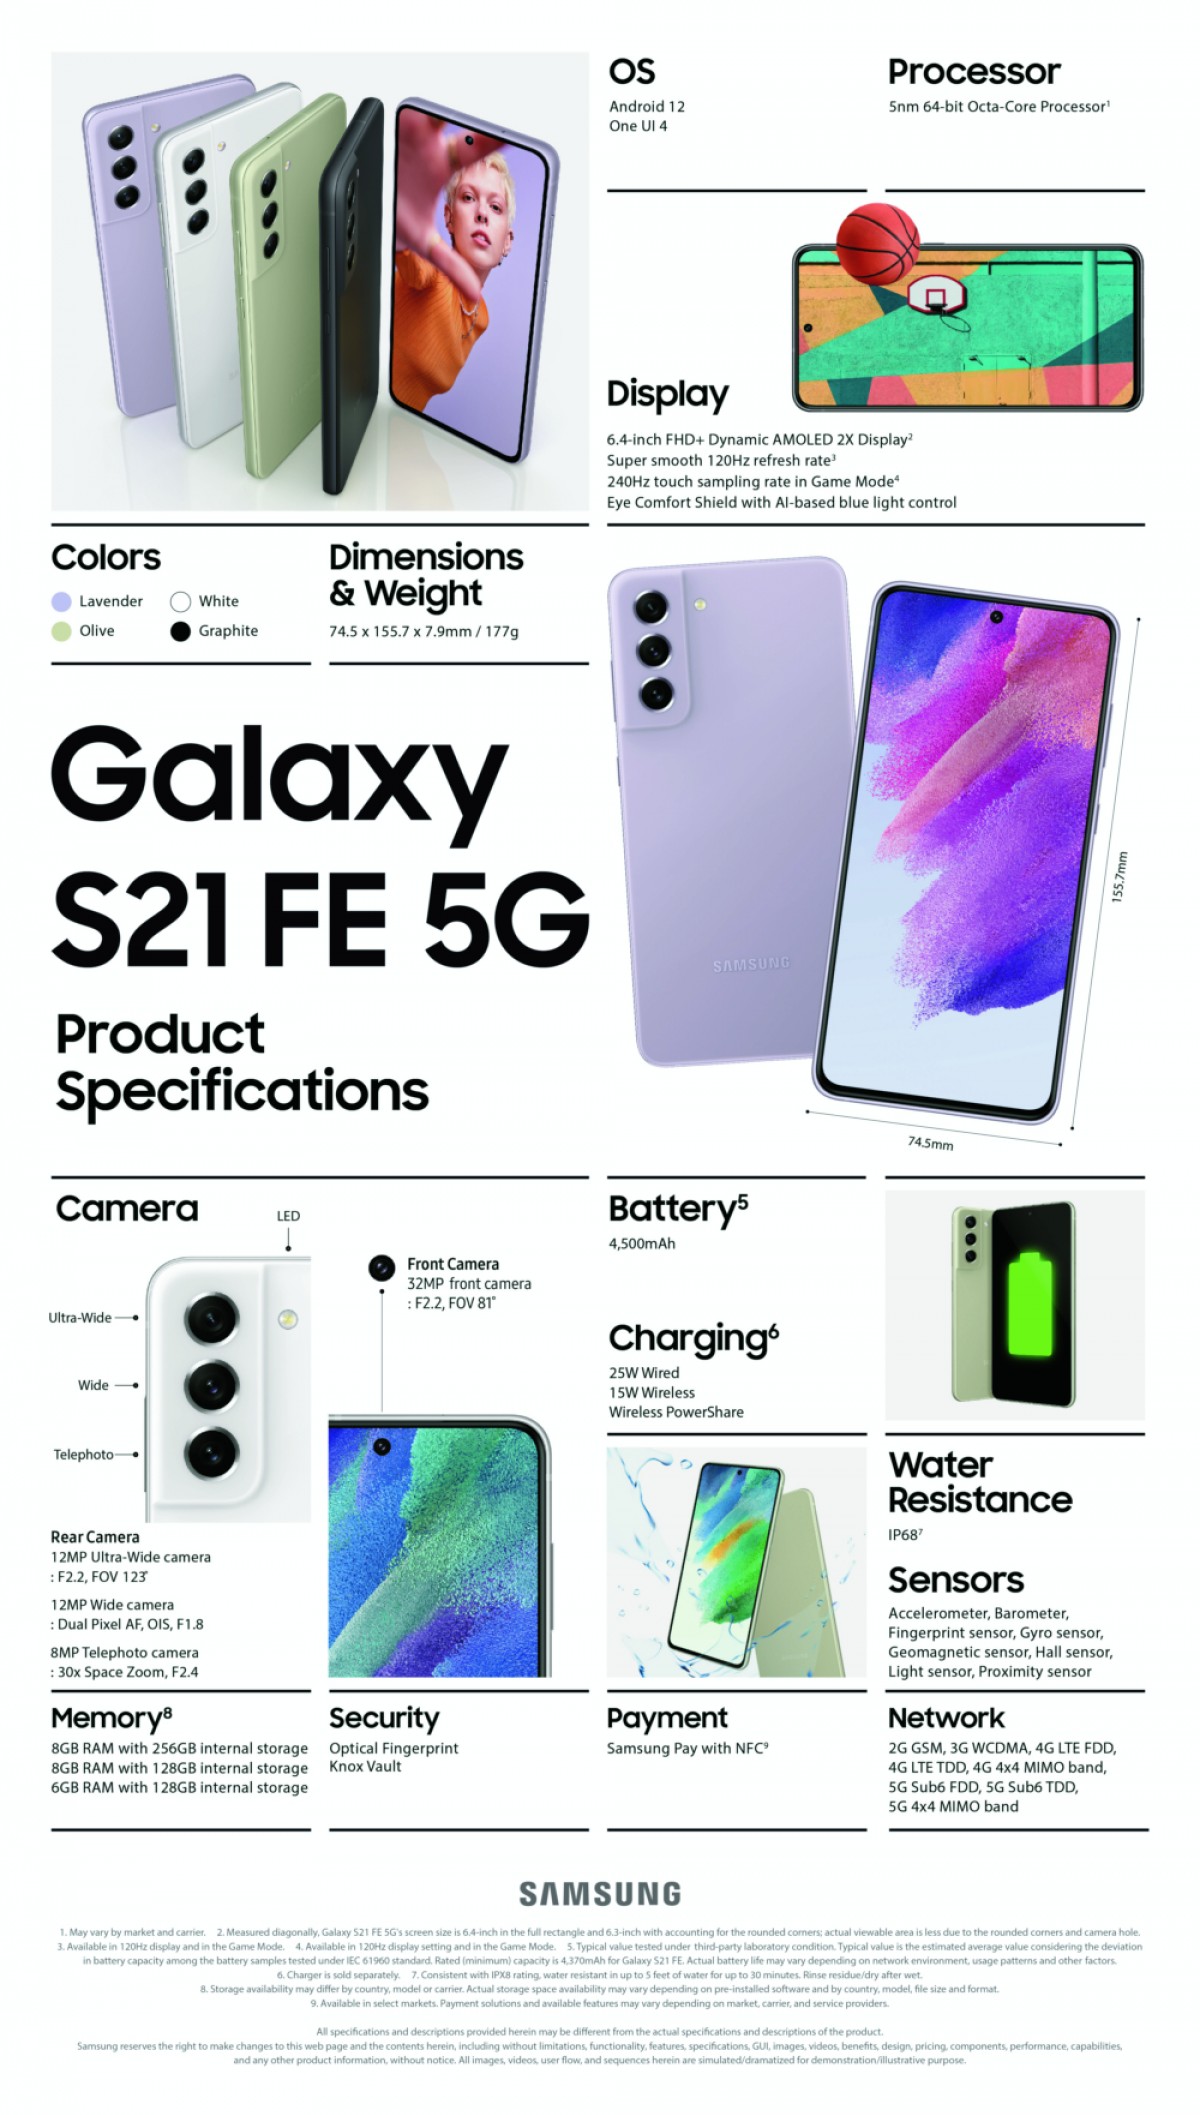 Samsung Galaxy S21 FE 5G infographic highlights key specs and design